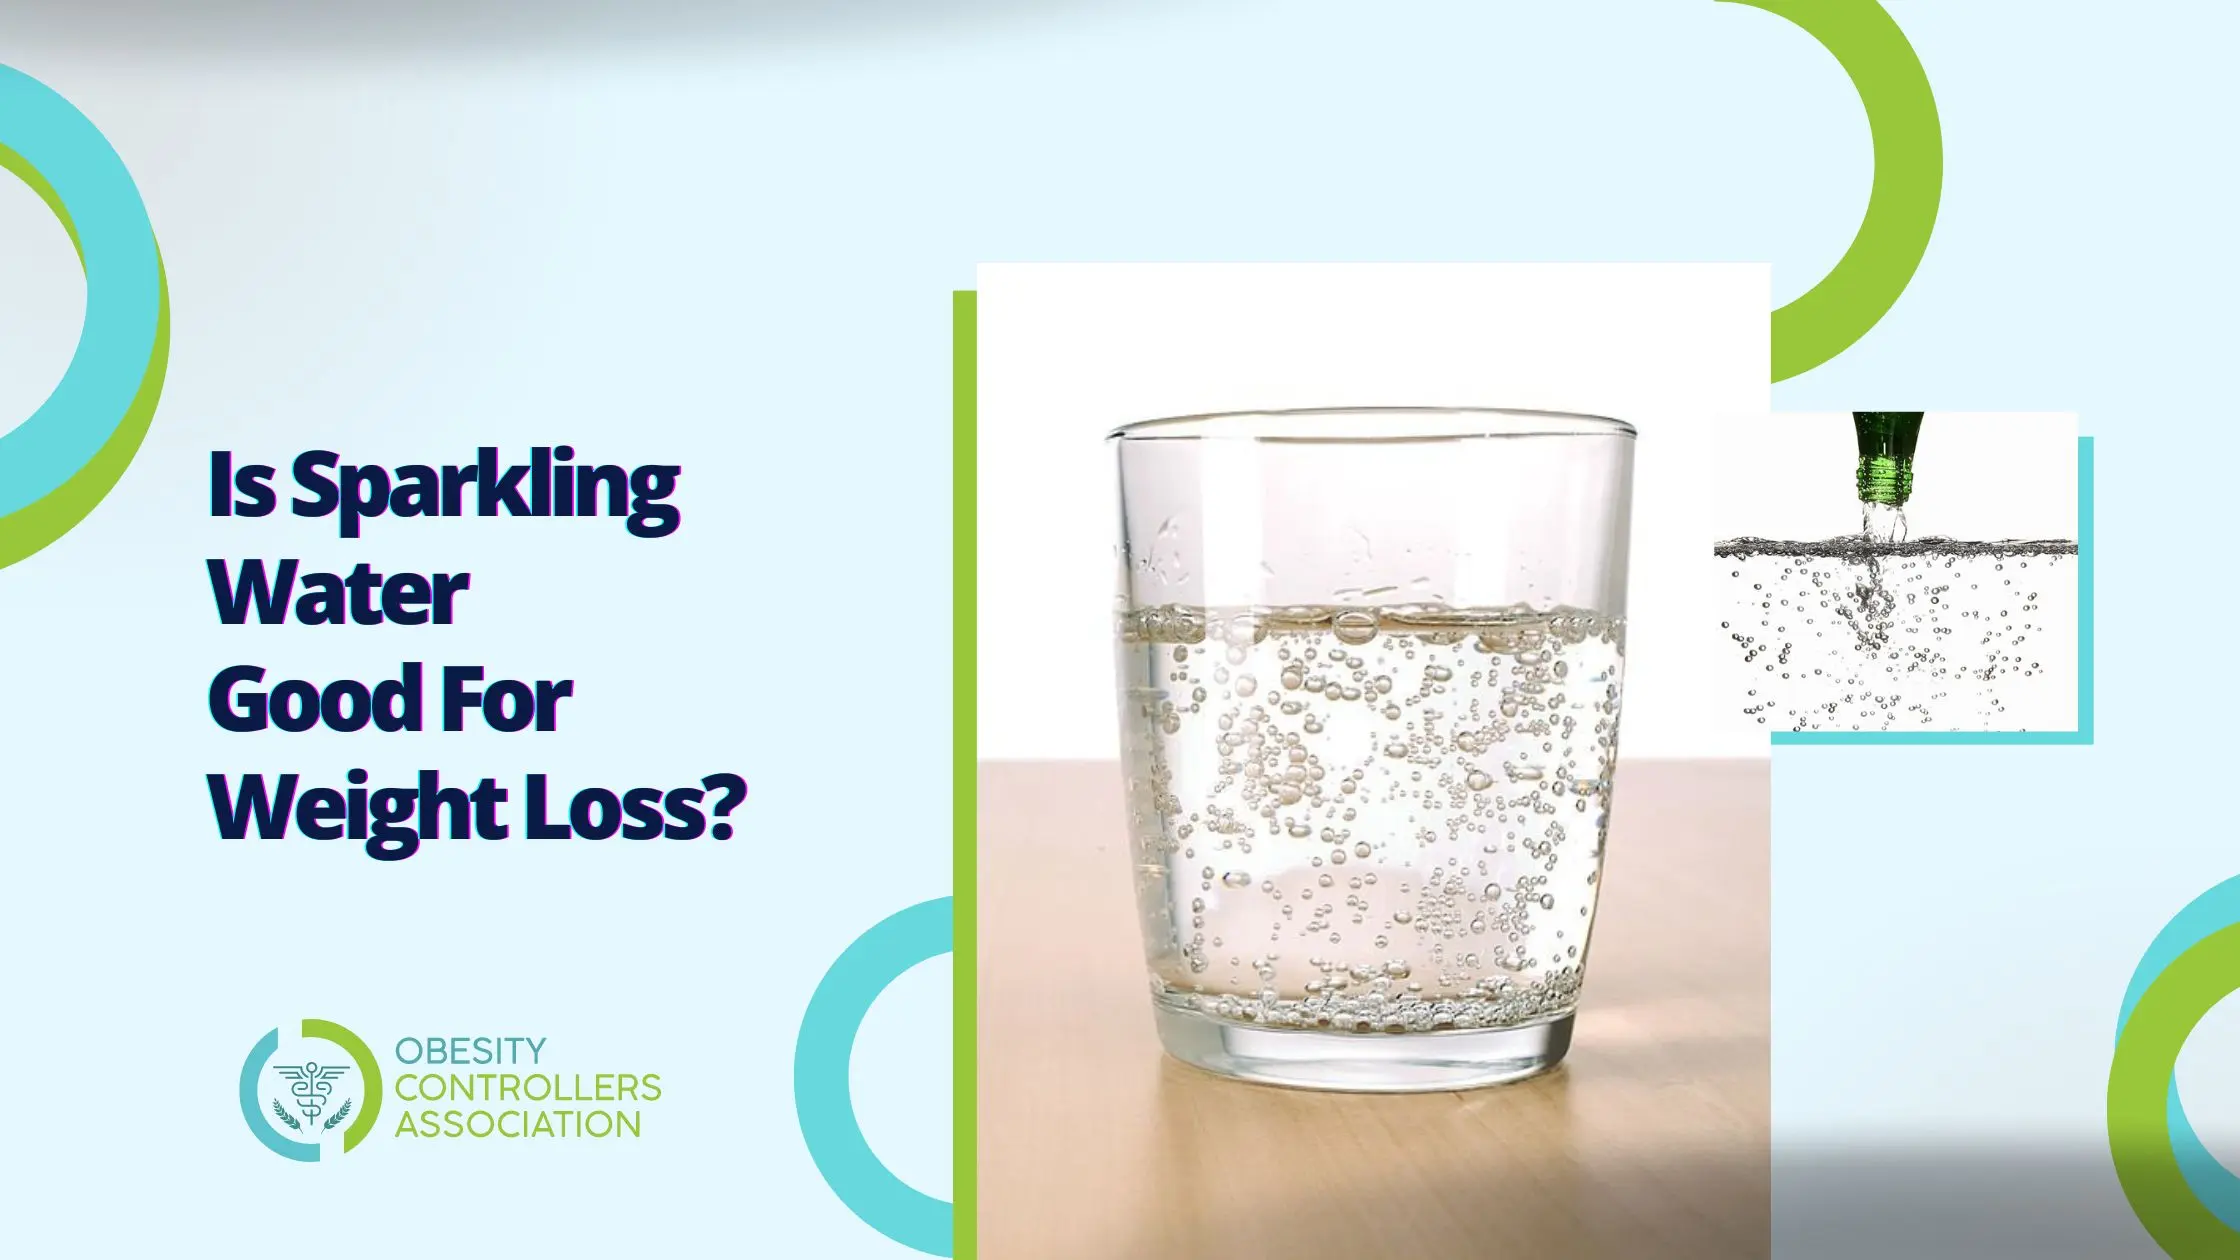 Sparkling Water Good For Weight Loss